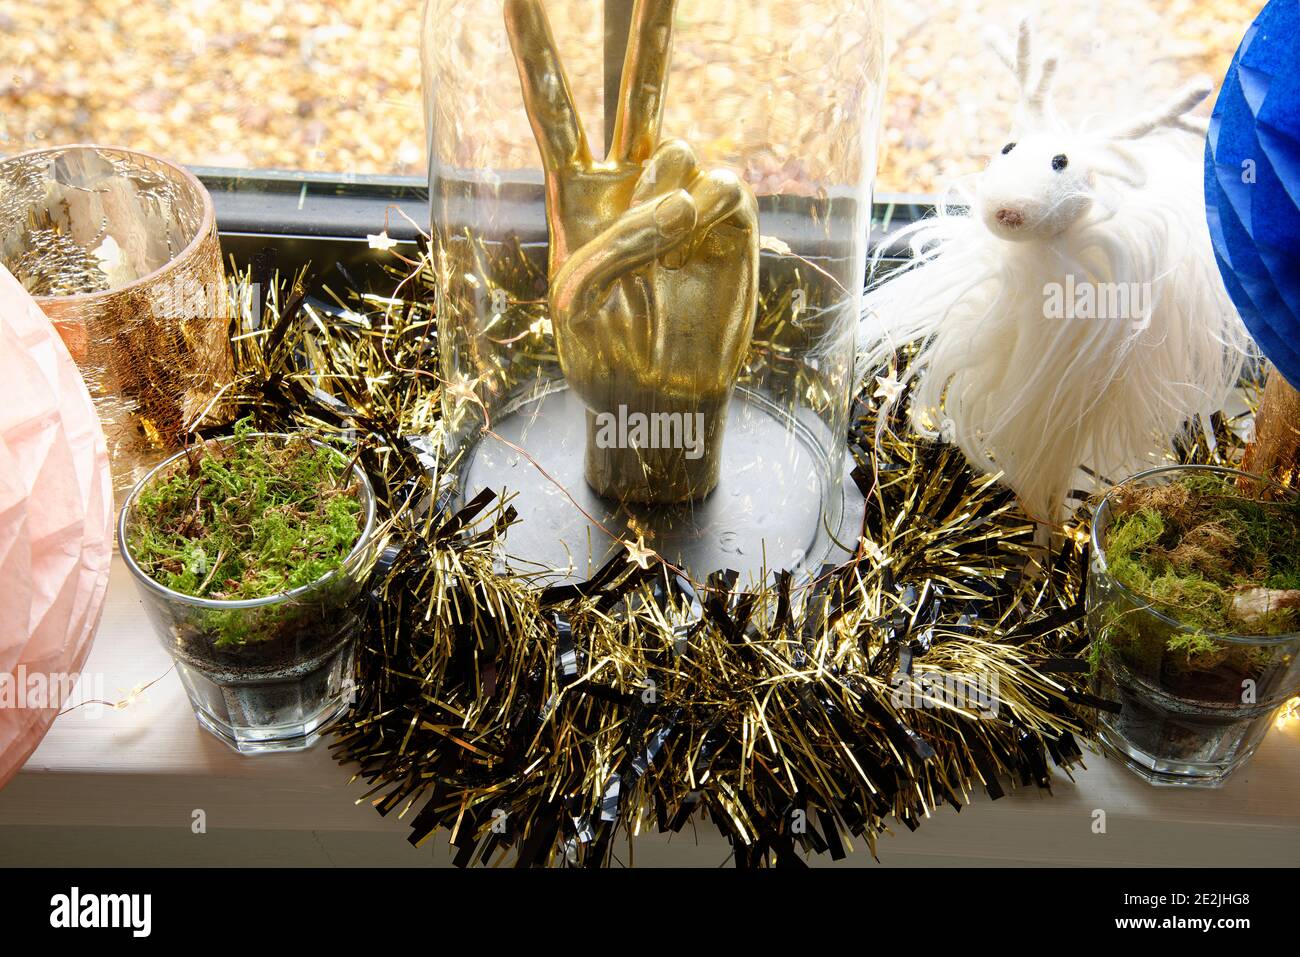 A window sill with Christmas decorations. Stock Photo